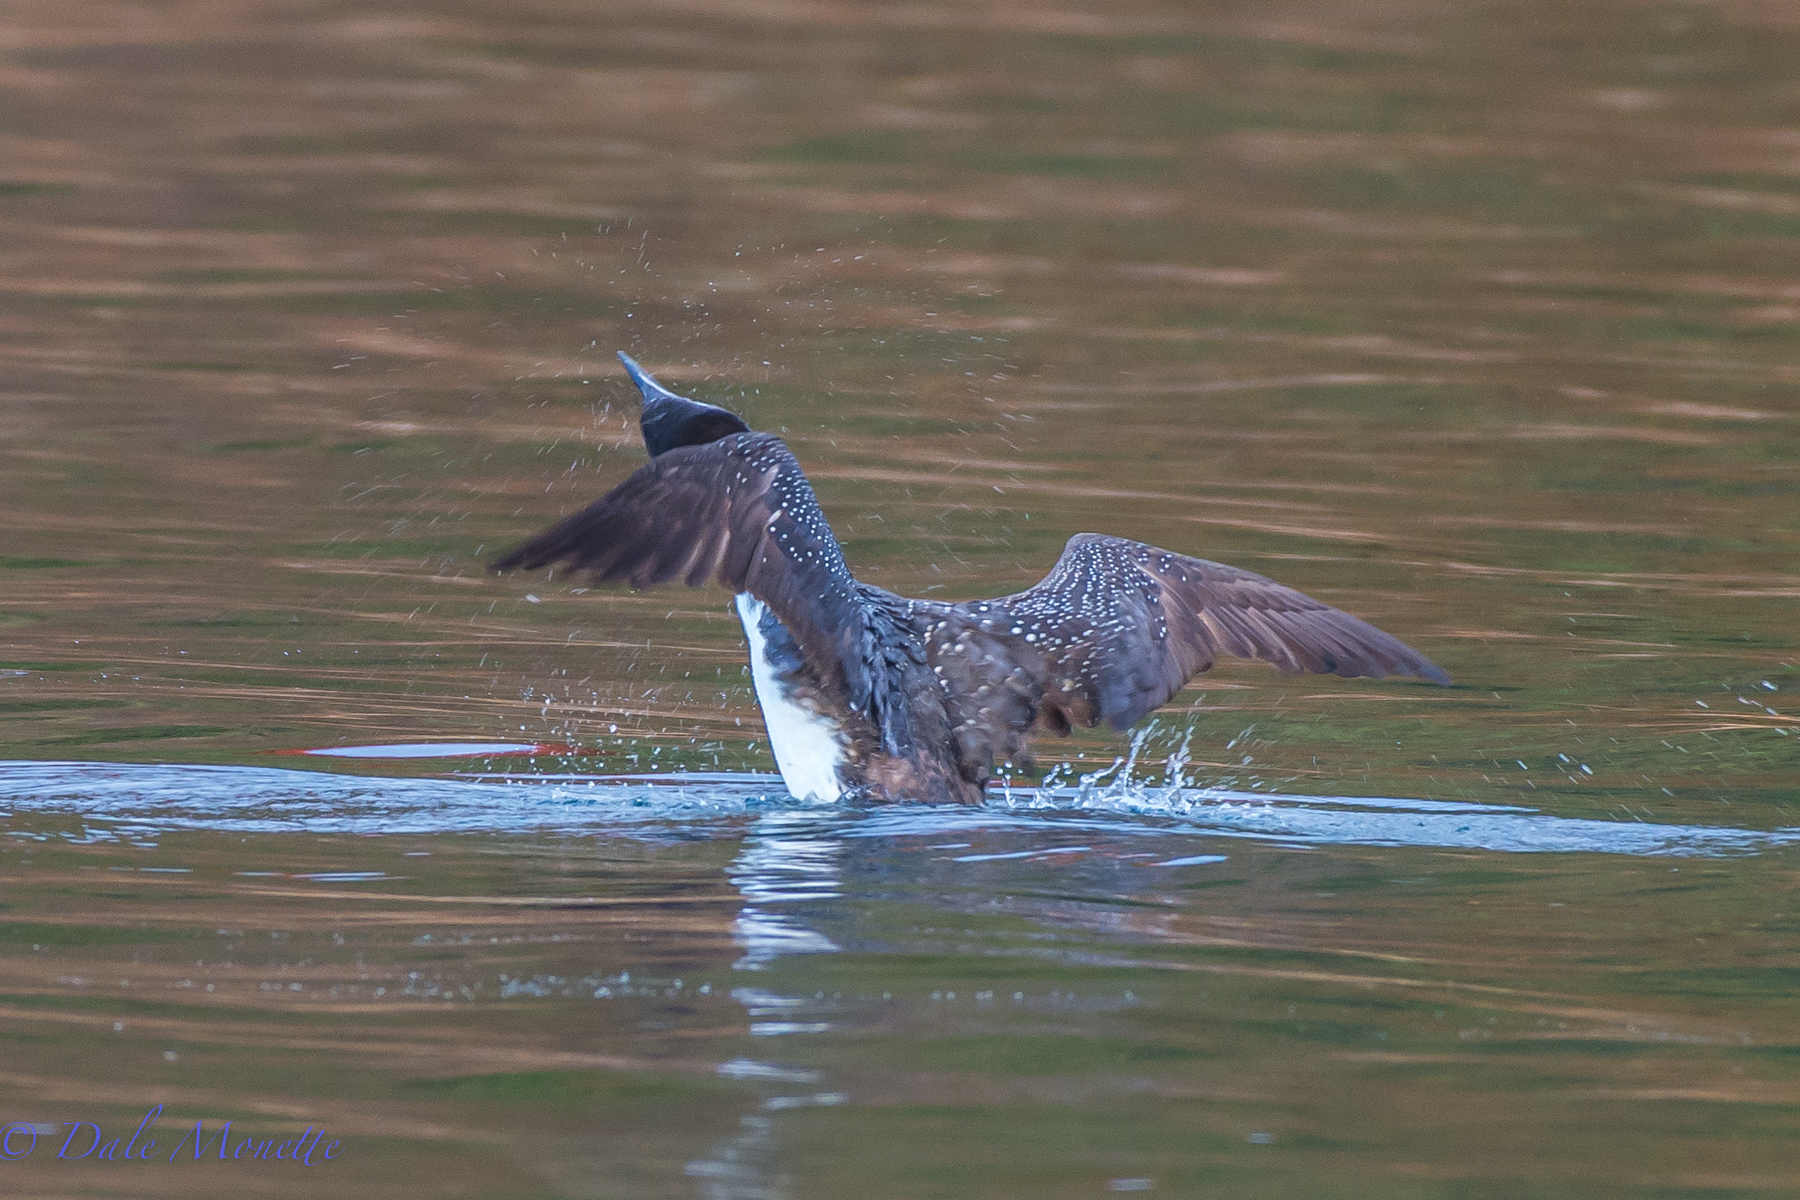 An adult loon shaking off excess water after a dive.  10/30/13